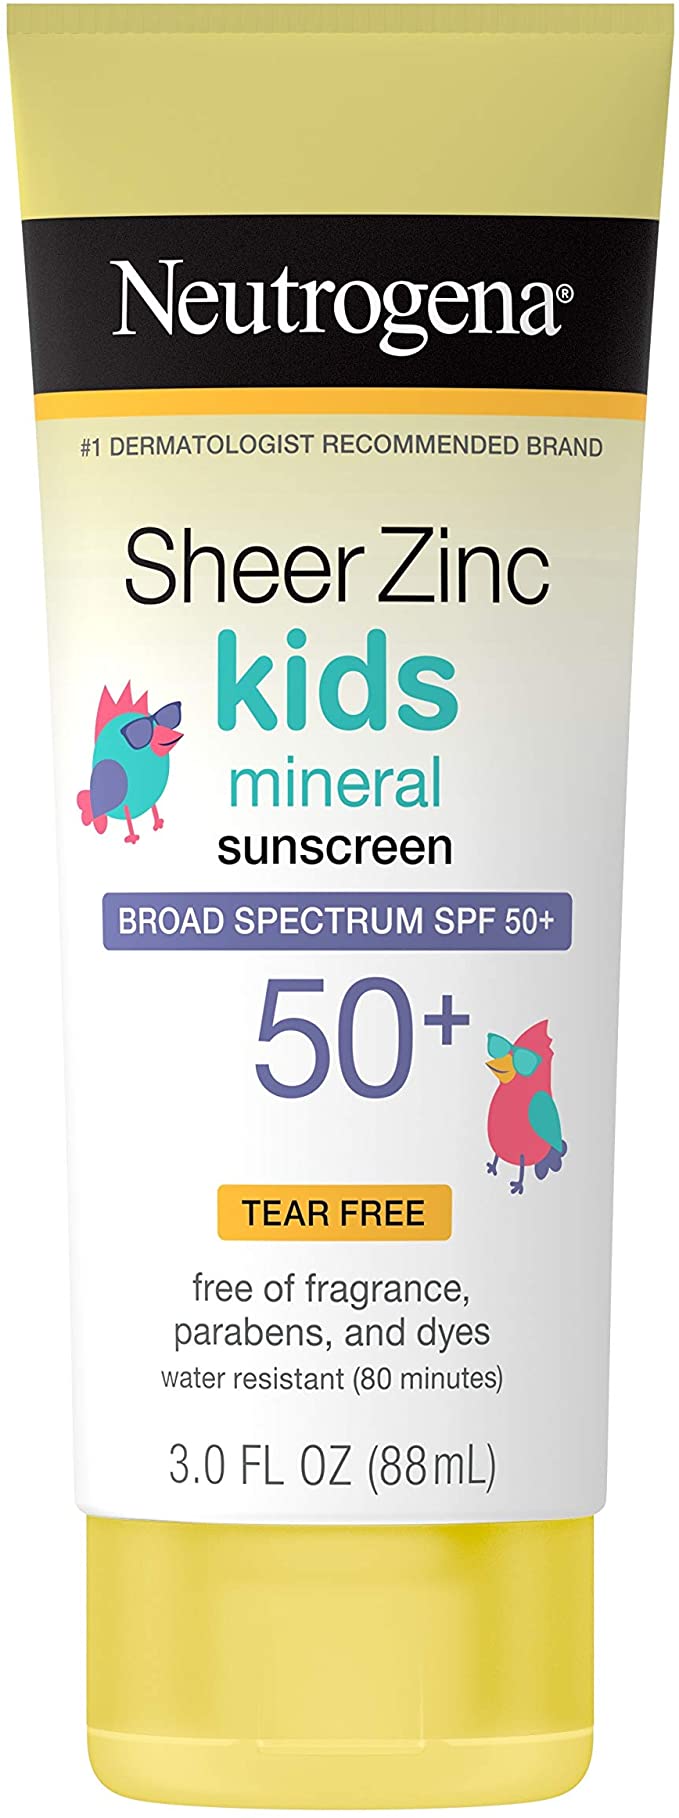 Neutrogena Sheer Zinc Oxide Kids Mineral Sunscreen Lotion, Broad Spectrum SPF 50+ with UVA/UVB Protection, Water Resistant for 80 Minutes, Paraben/Dye/Fragrance & Tear Free, 3 Fl Oz